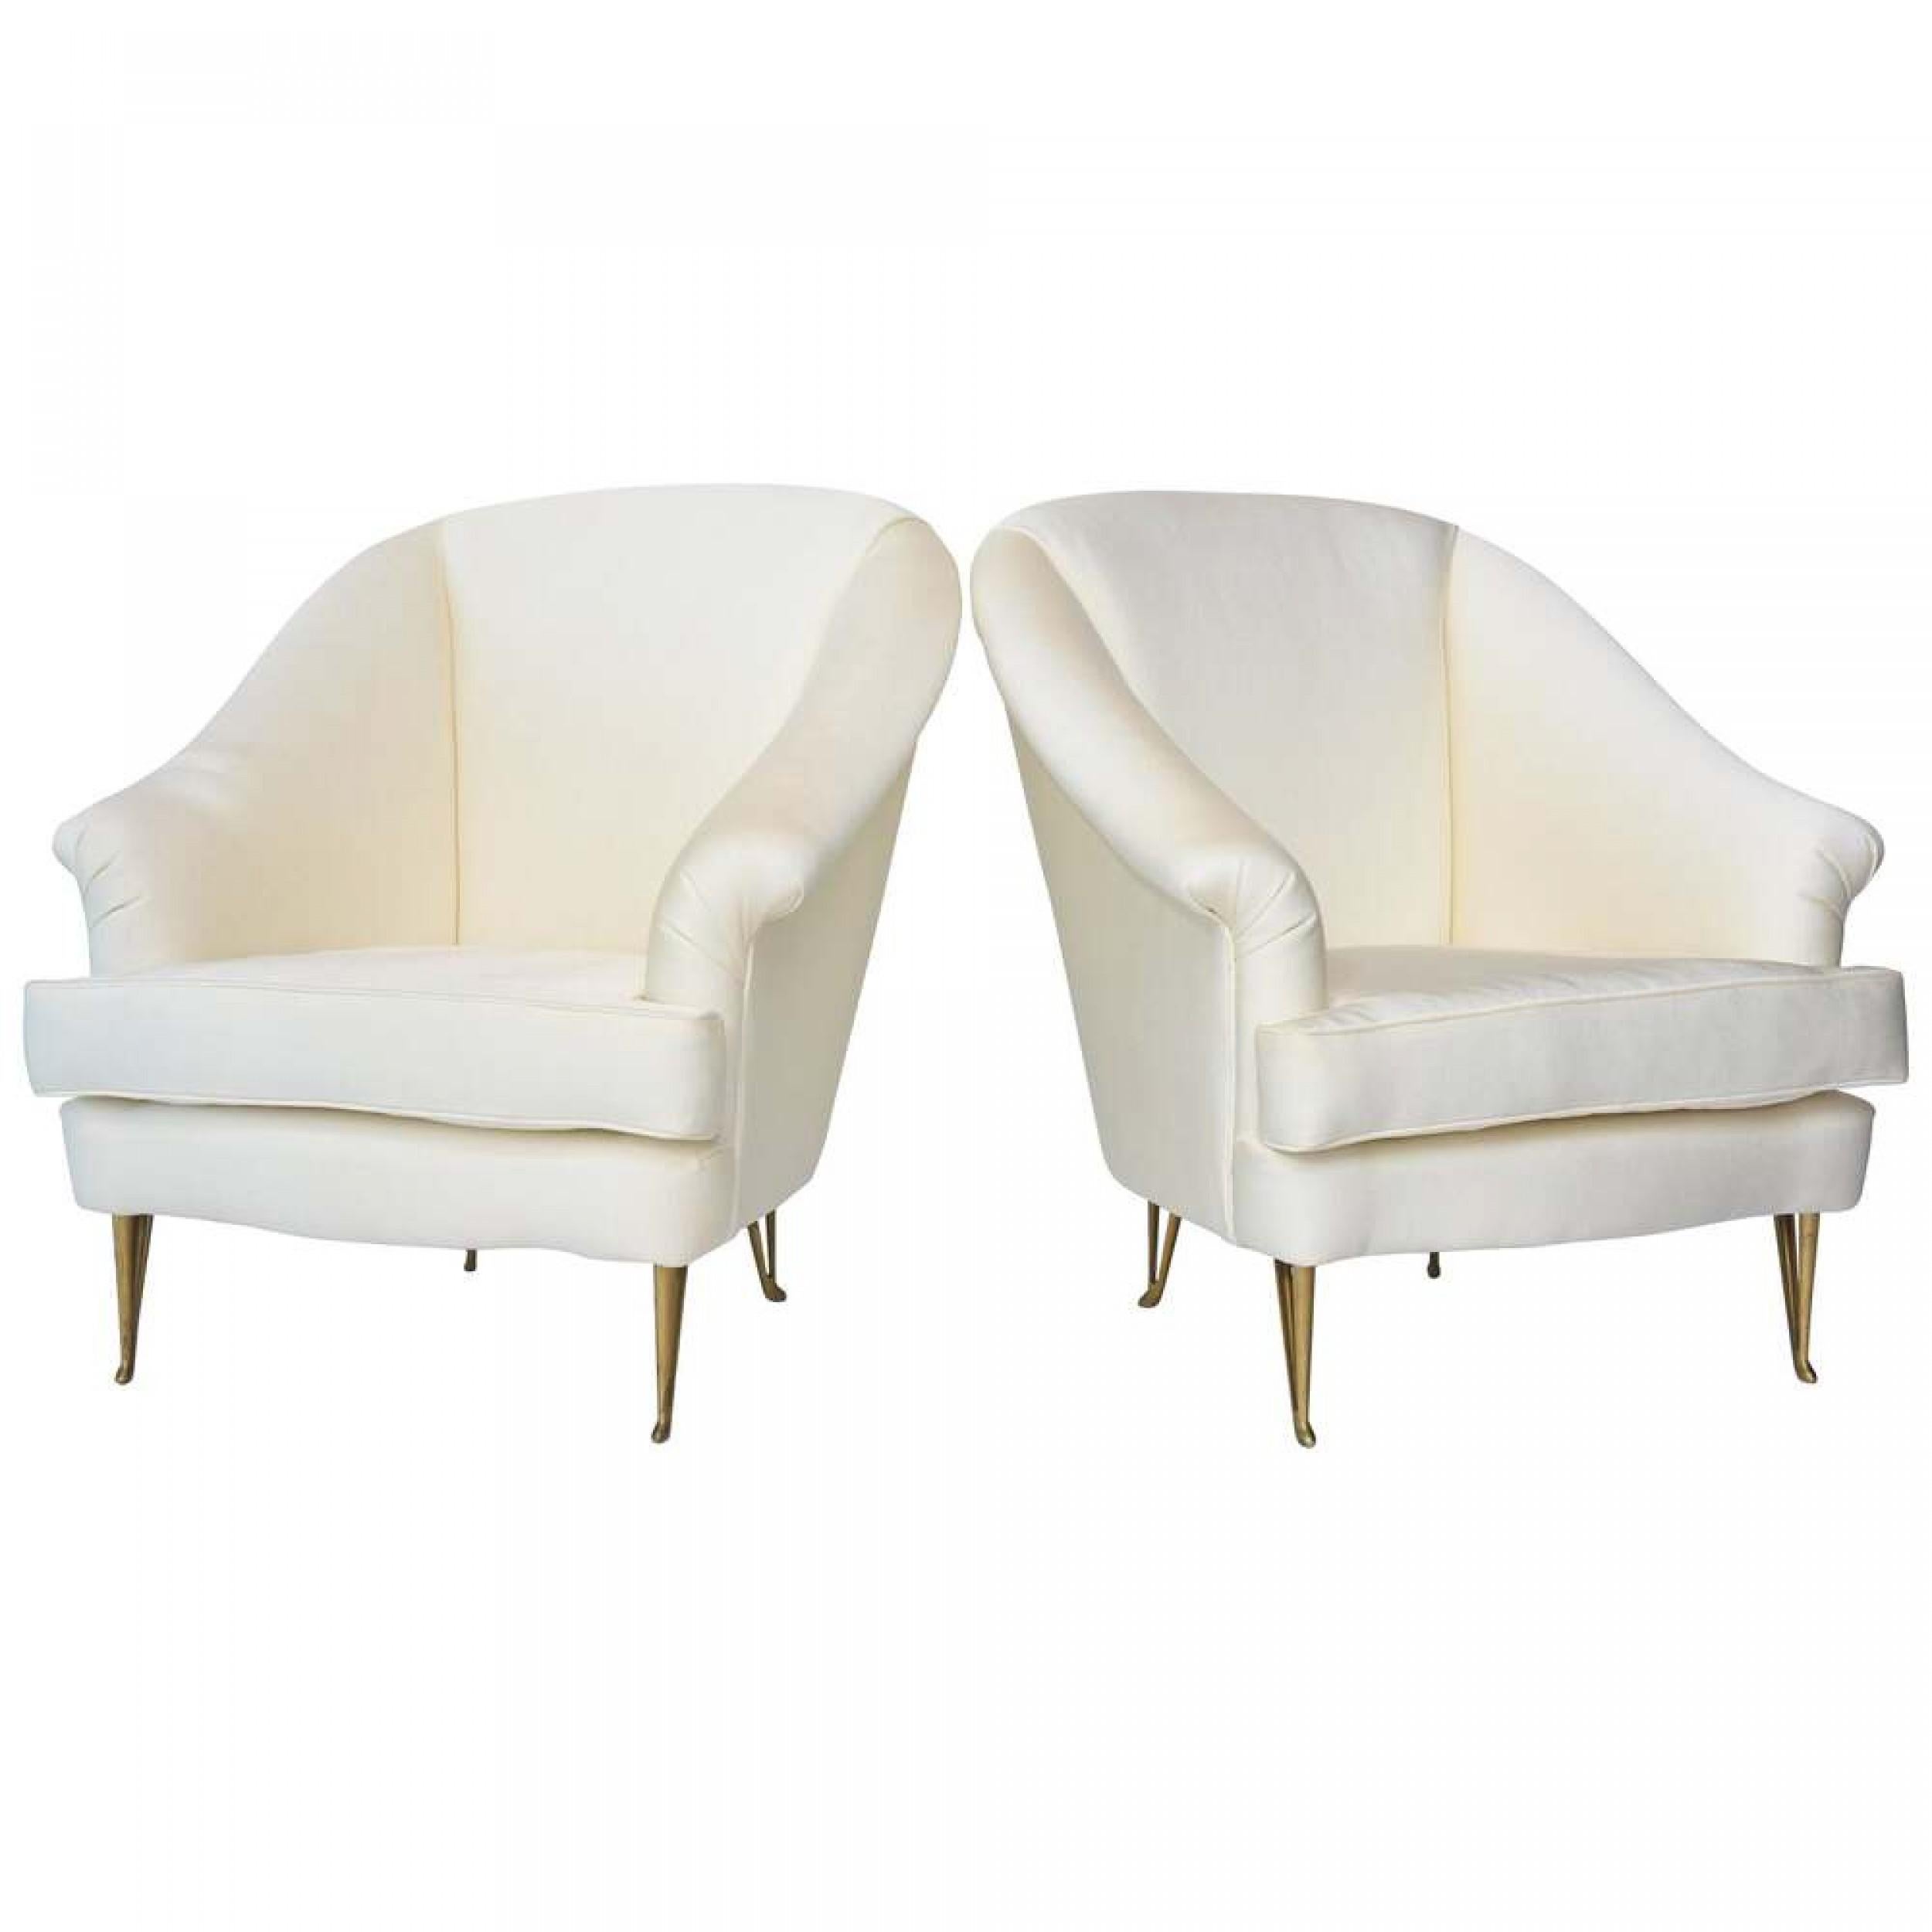 PAIR of Italian Mid-Century Modern (1950s) club chairs in white upholstery. (ISA INTERNATIONAL INC, Attributed to GIO PONTI) (PRICED AS PAIR).